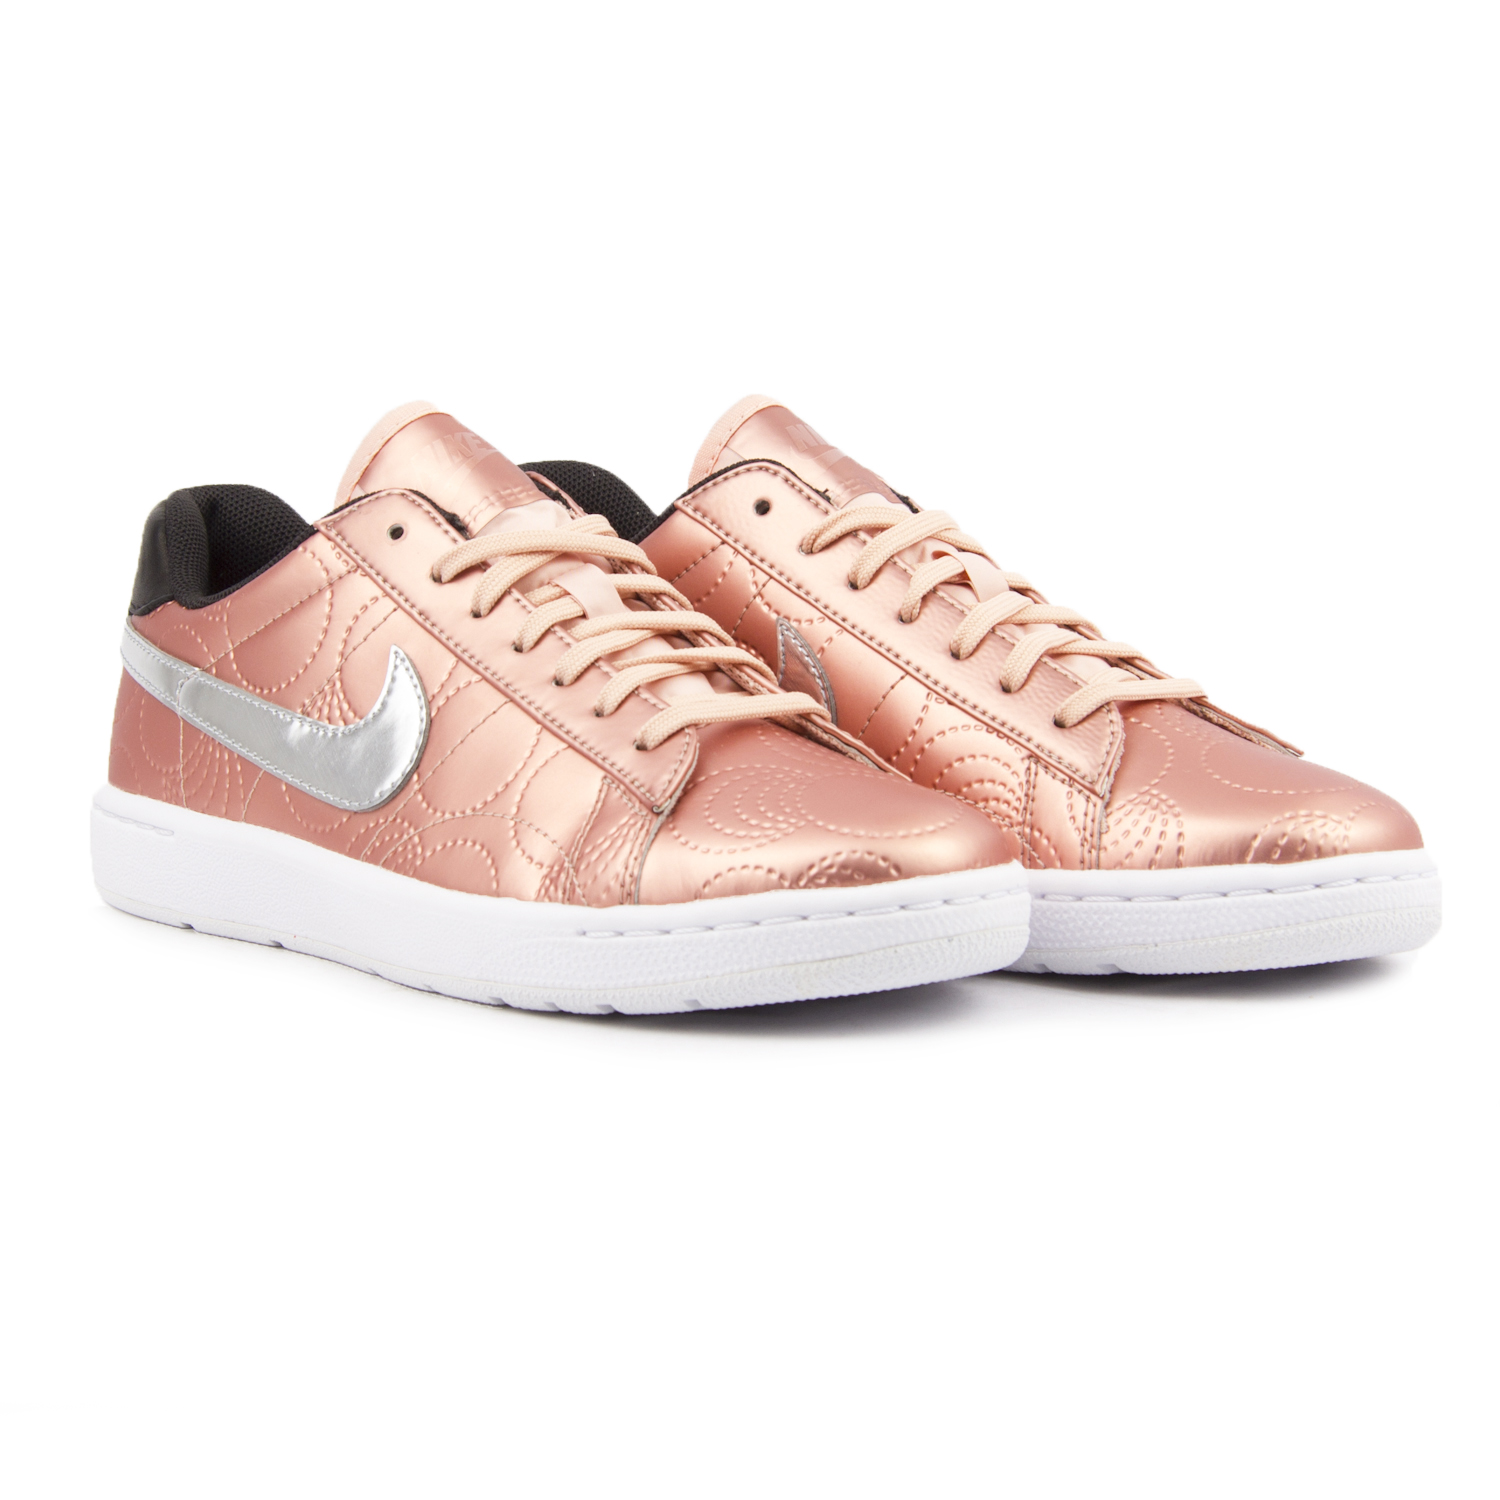 Nike Cortez Trainers In Rose Gold Metallic Leather